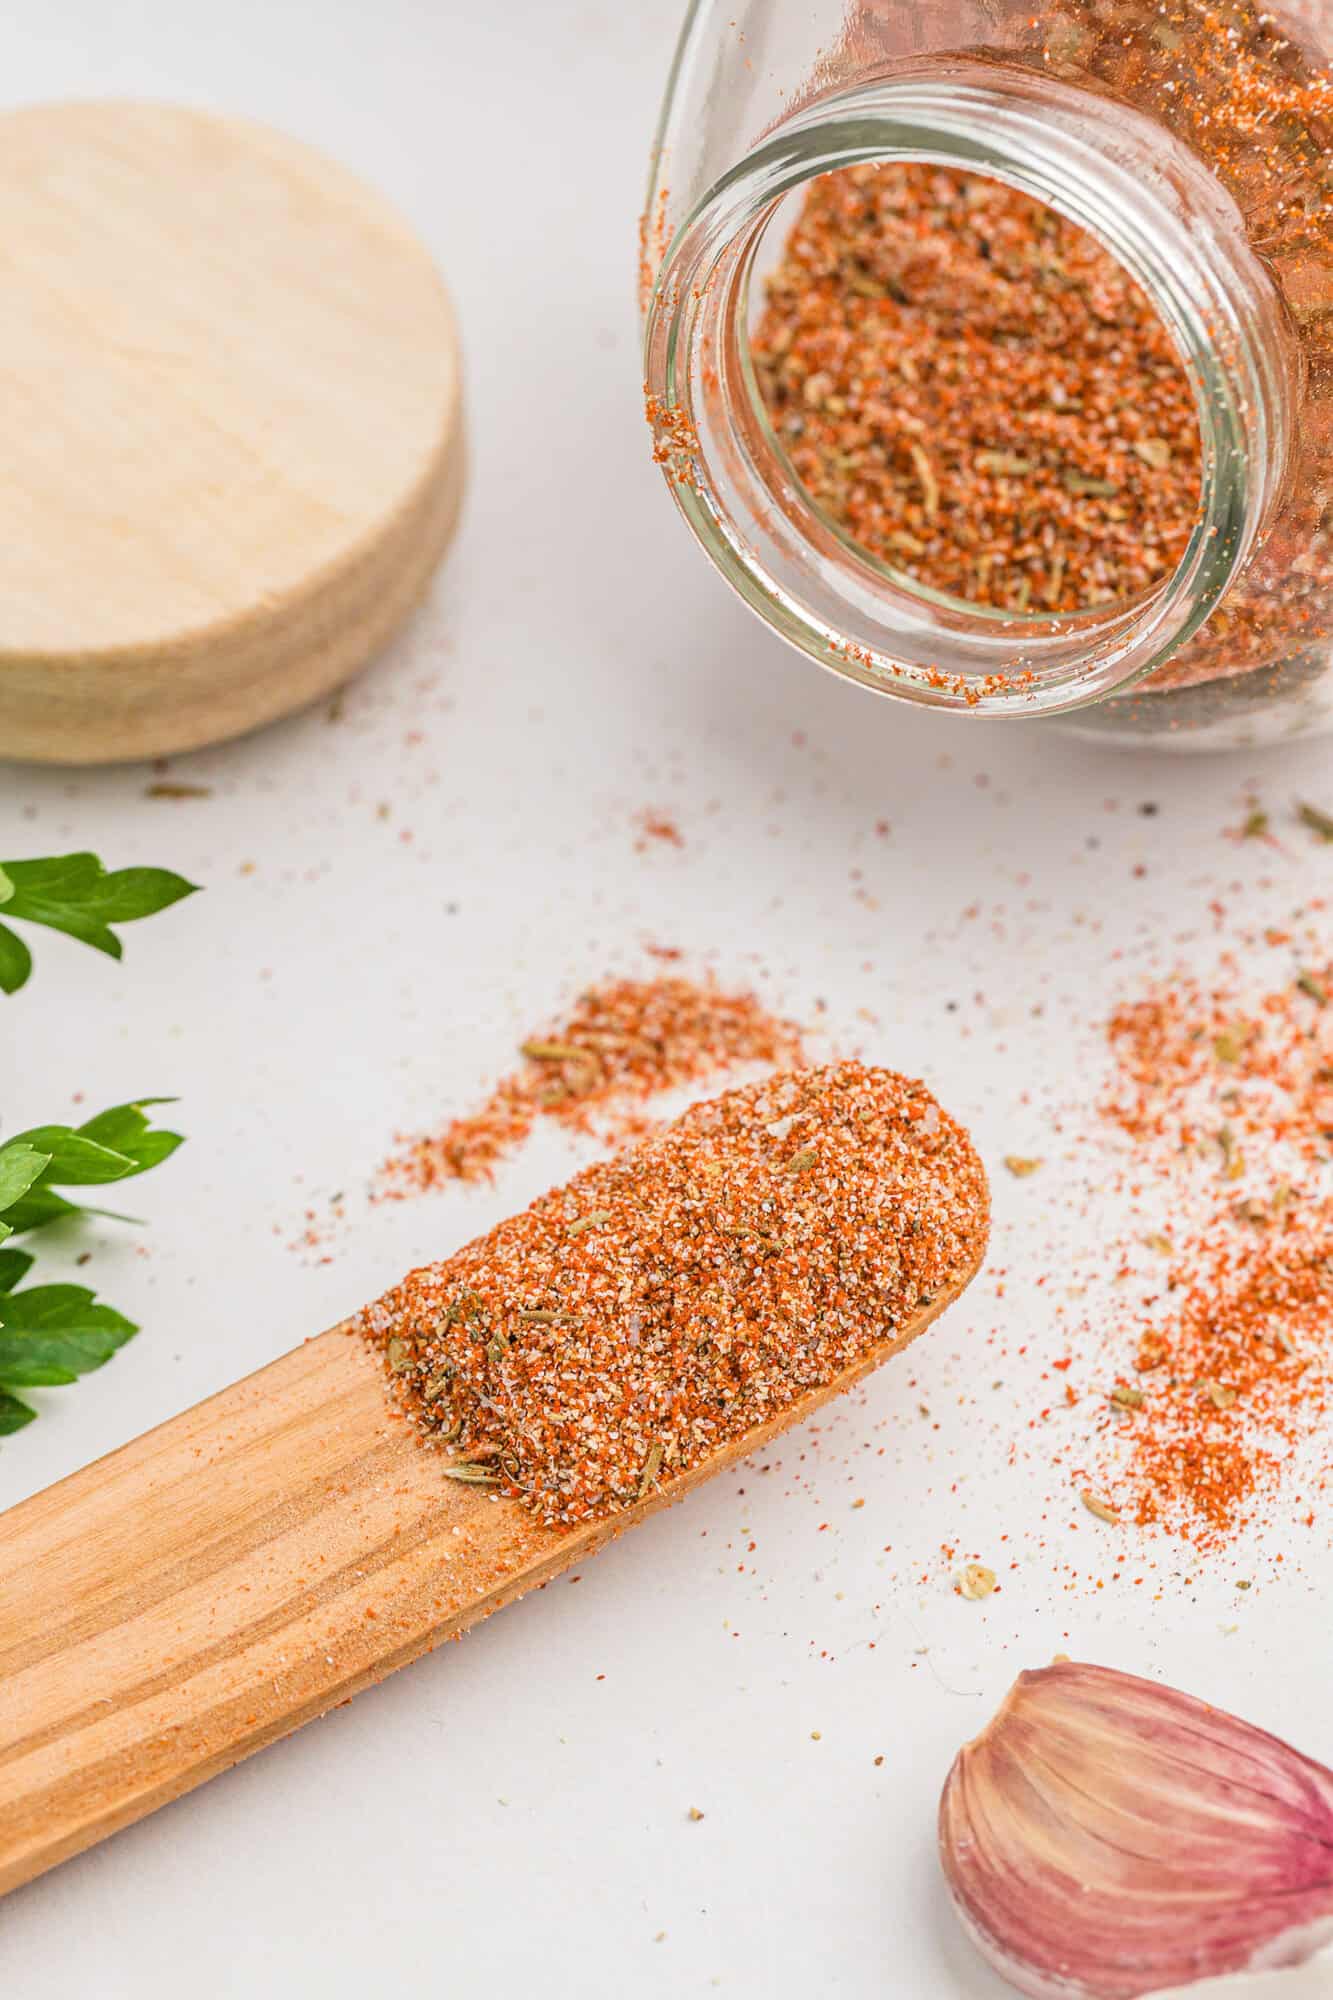 Cajun seasoning on a small wooden spoon and spilling out of a jar.